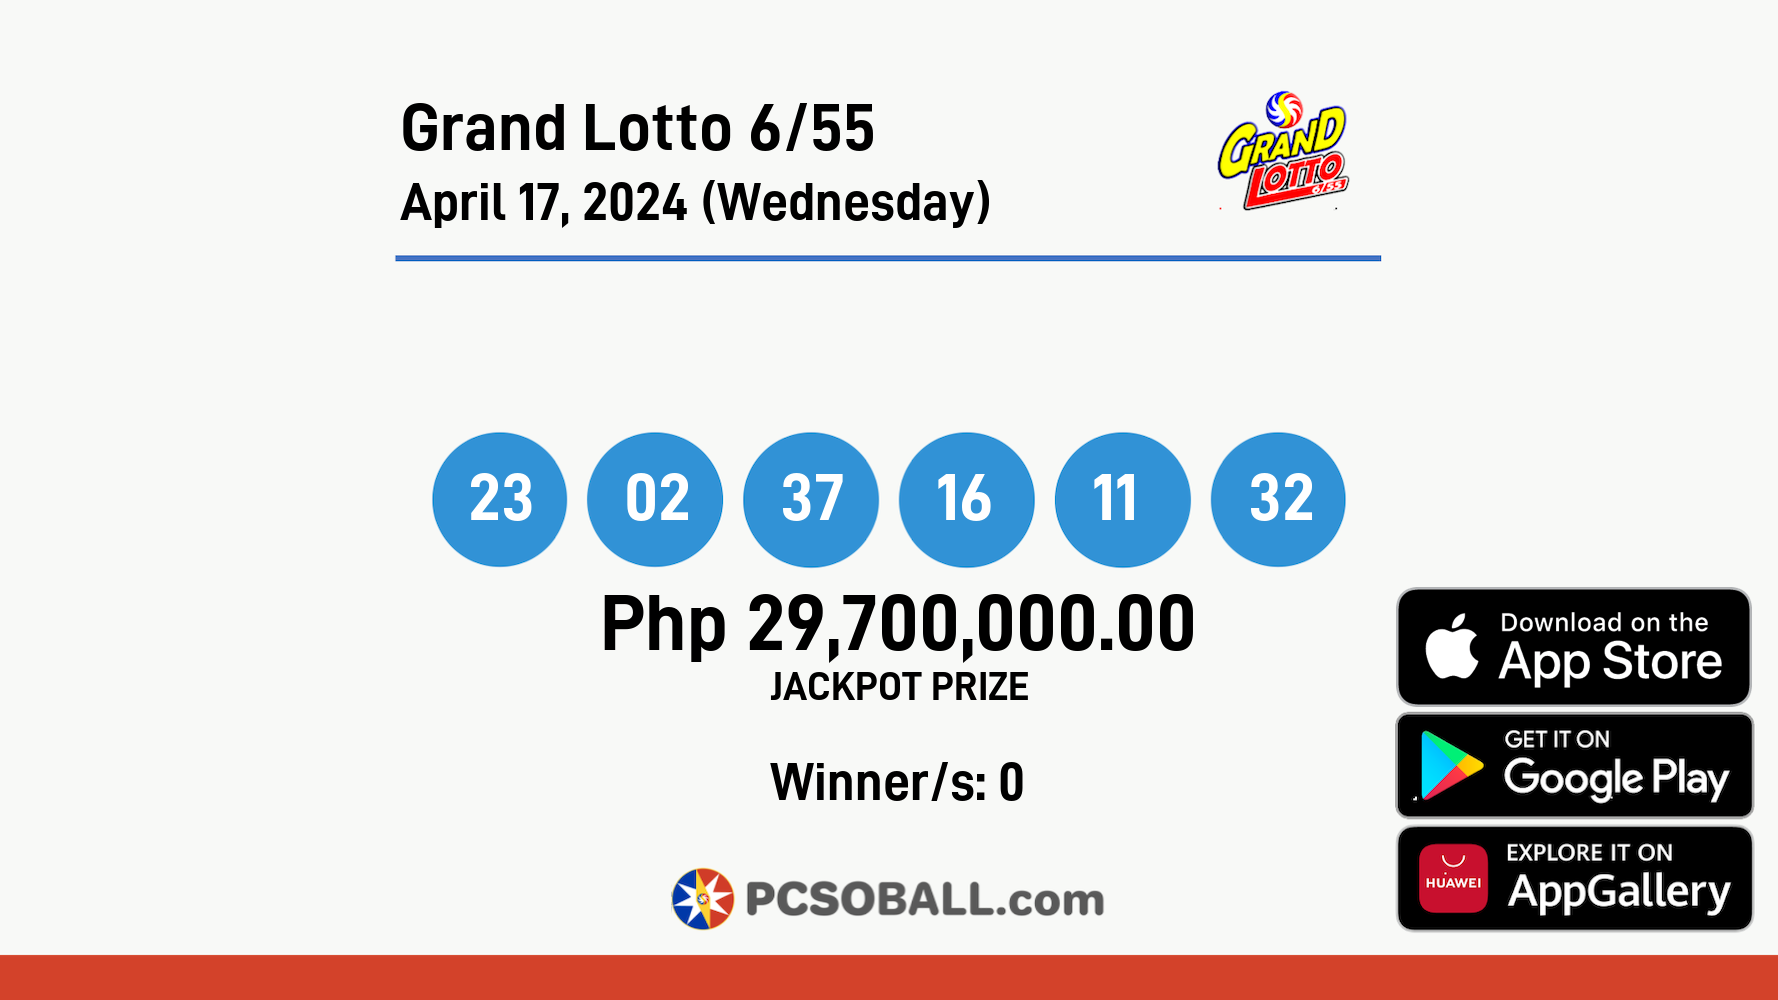 Grand Lotto 6/55 April 17, 2024 (Wednesday) Result